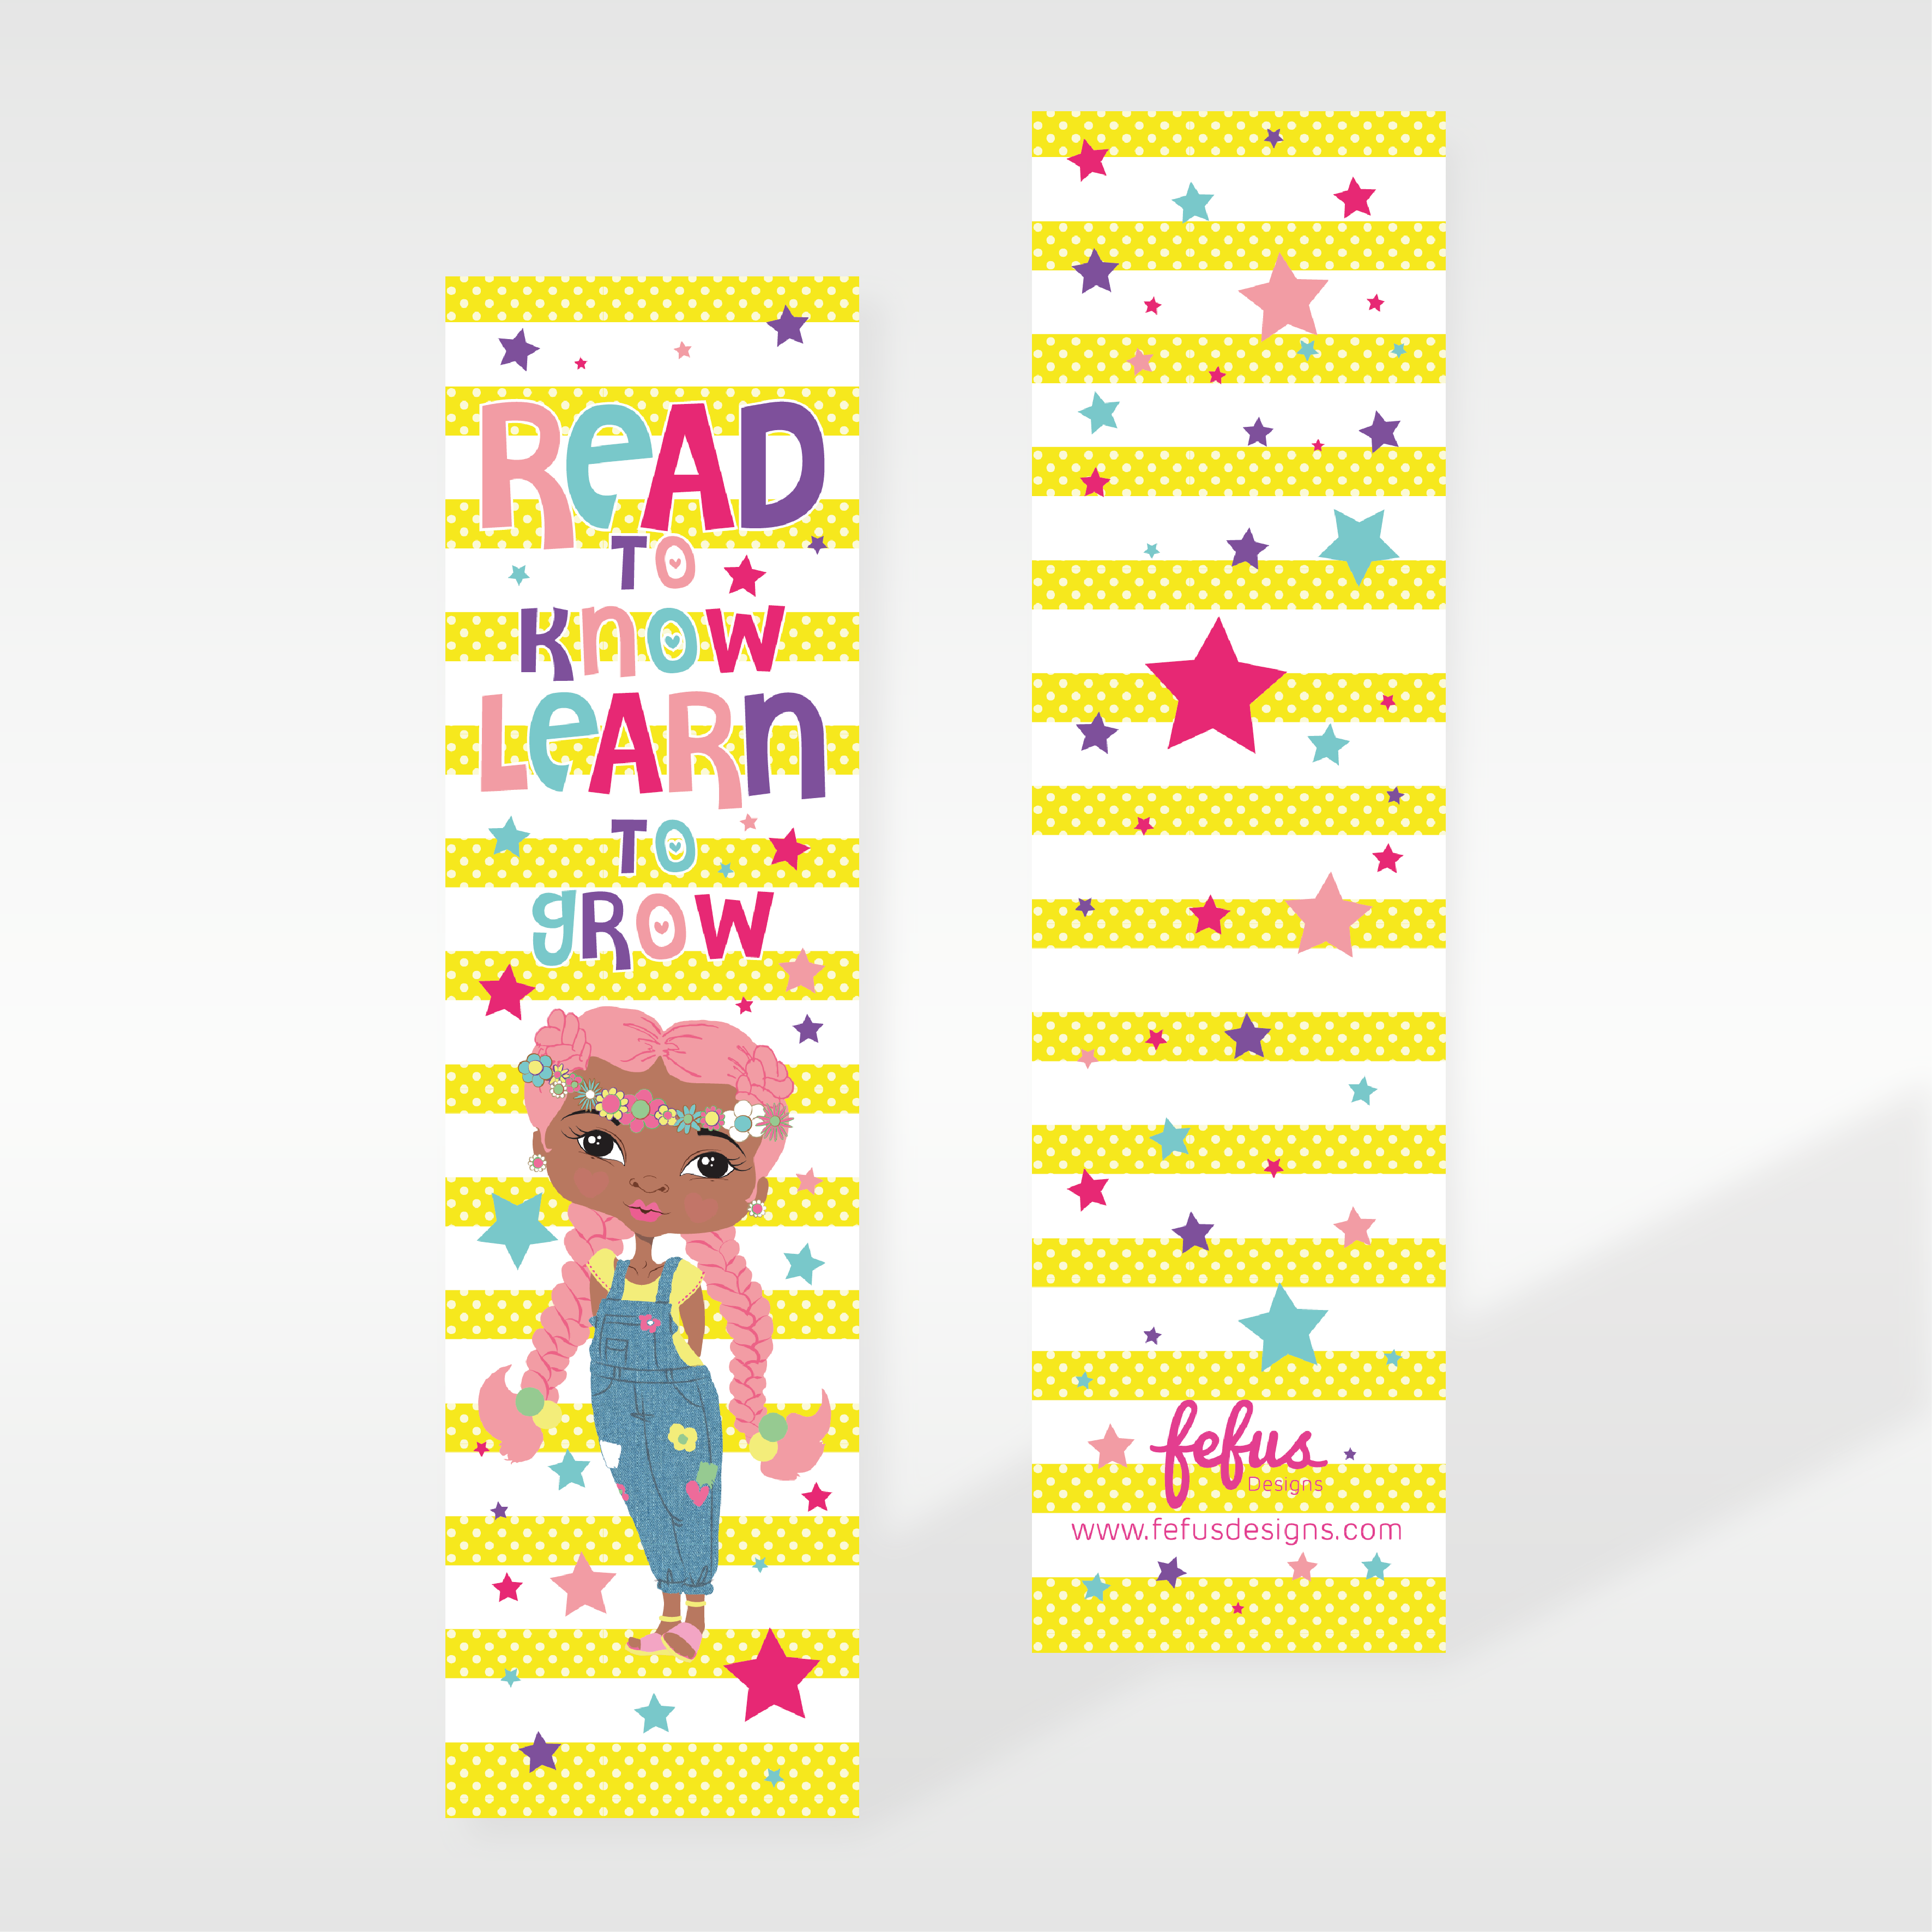 Read To Know - Multicultural Girls Bookmarks | Fefus designs